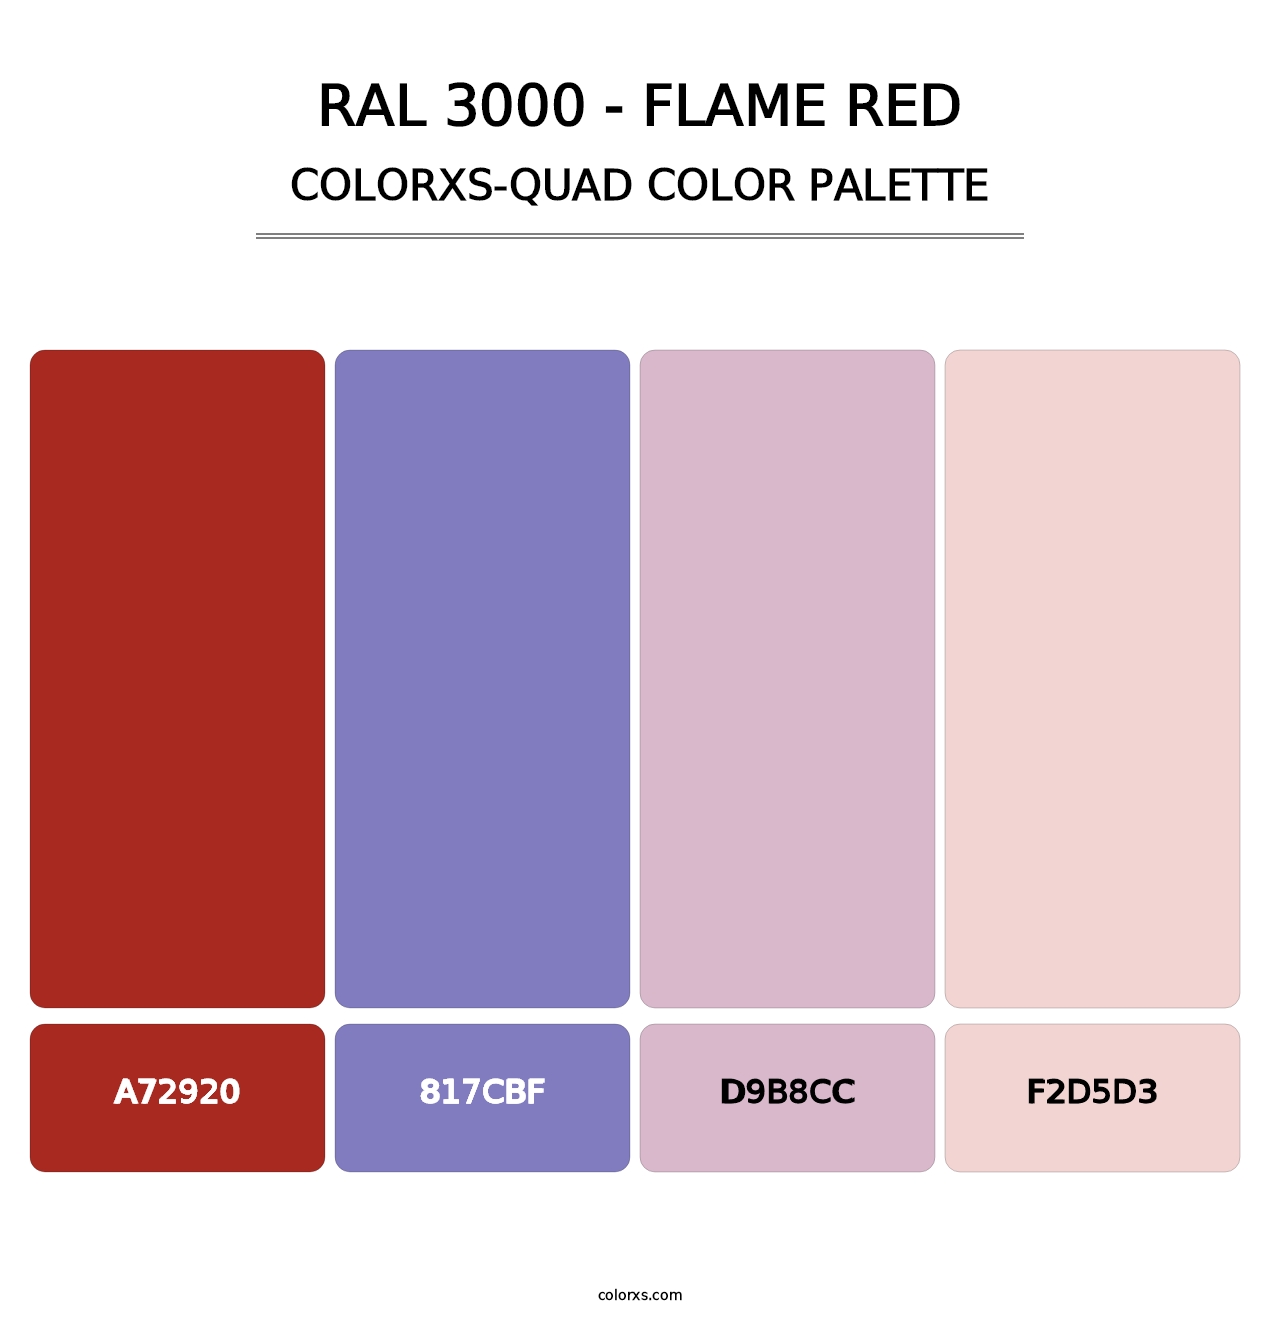 RAL 3000 - Flame Red - Colorxs Quad Palette